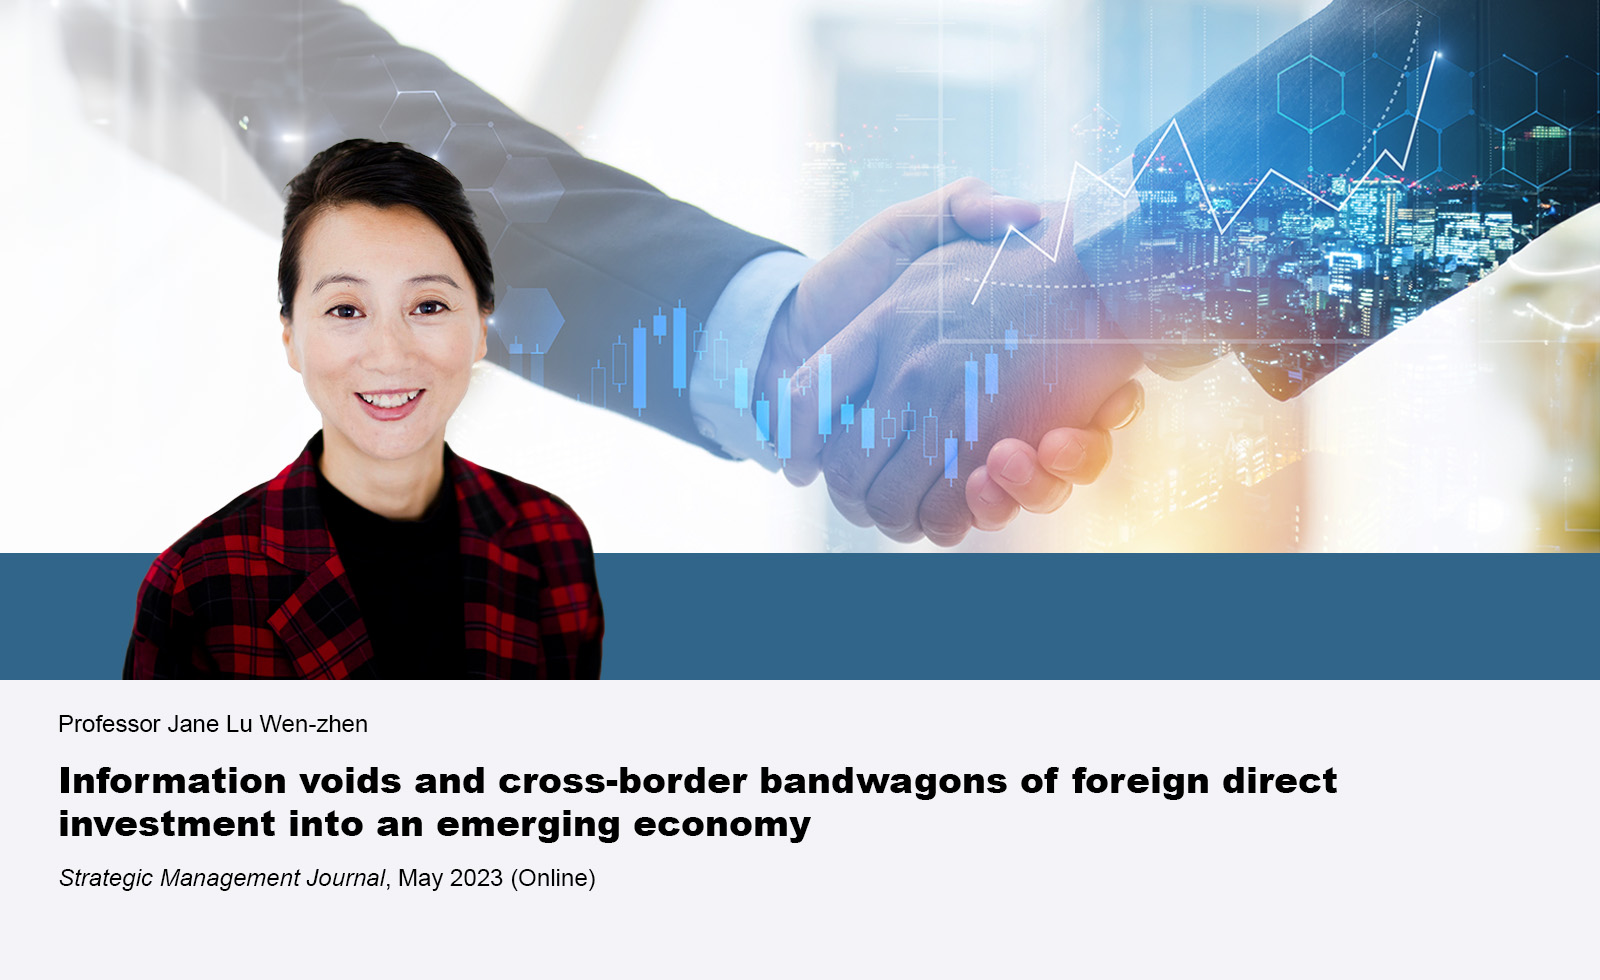 Information voids and cross-border bandwagons of foreign direct investment into an emerging economy